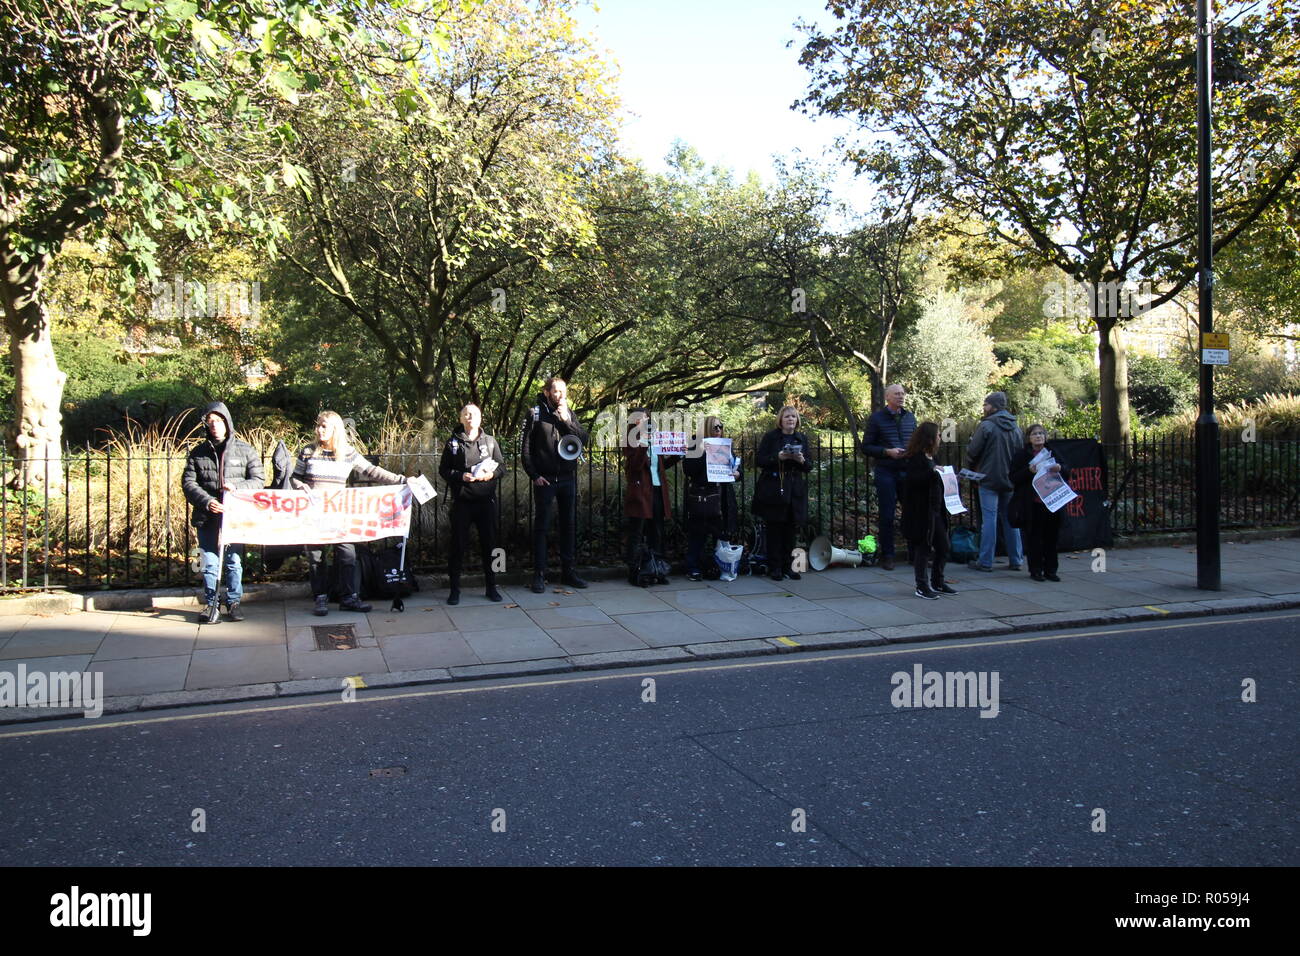 London, UK. 2nd Nov 2018. Protest outside the Danish Embassy, London to protest the ongoing, barbaric and savage killing of dolphins and whales during the Grindadrap hunts in the Faroe Islands. Credit: Jason Murphy/Alamy Live News Stock Photo